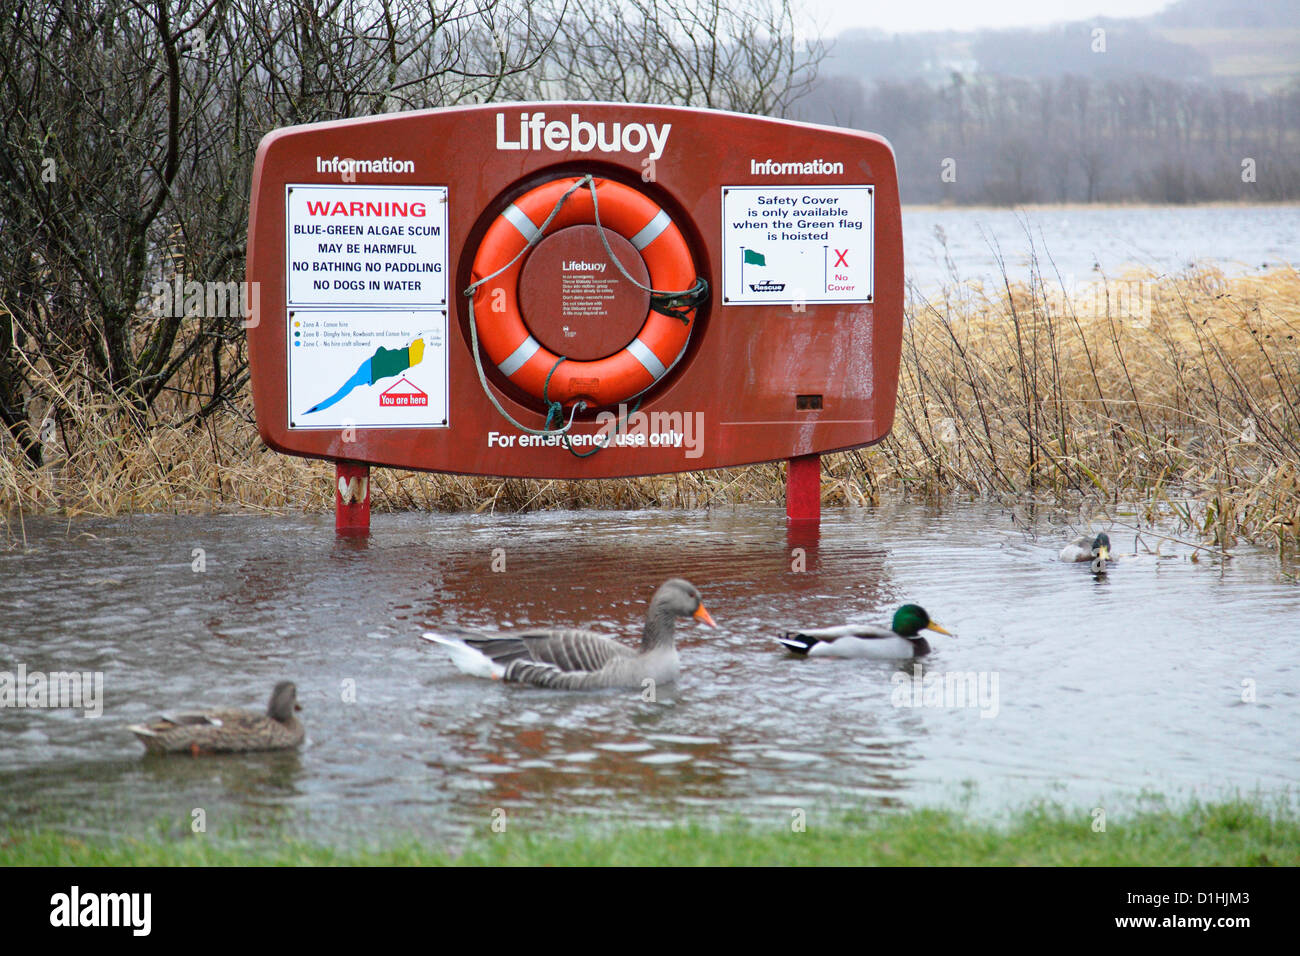 Castle Semple Visitor Centre, Lochwinnoch, Renfrewshire, Scotland, UK, Sunday, 23rd December, 2012. Ducks and a greylag goose paddling past a flooded lifebuoy stand at Castle Semple Loch in Clyde Muirshiel Regional Park following persistent heavy rain Stock Photo